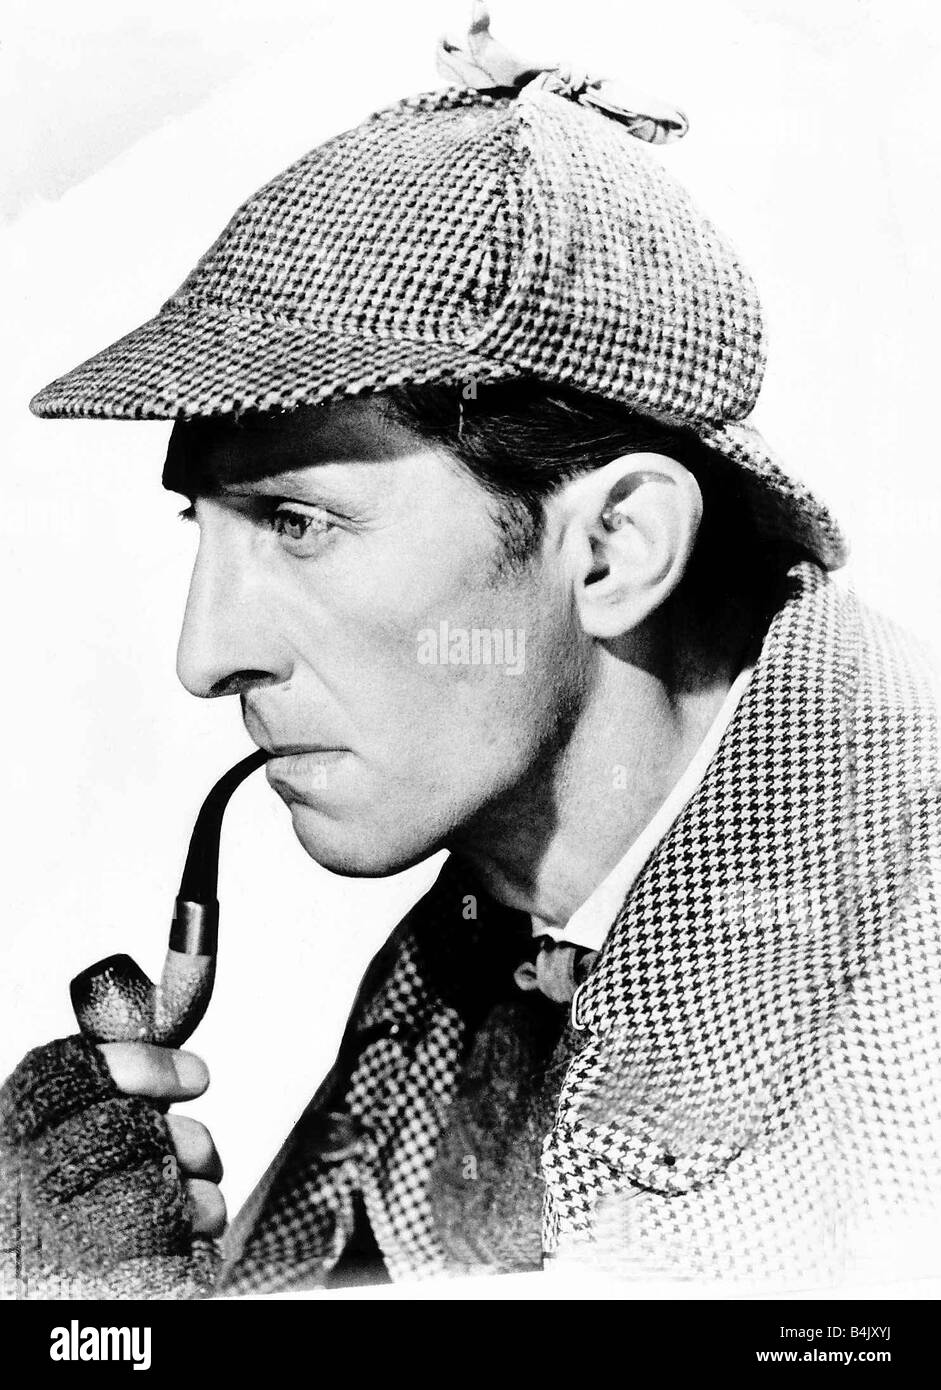 Peter Cushing December 1968 Actor born Kenley Surrey 26 May 1913 OBE 1989 married 1943 Helen Beck died 1971 died Canterbury 11 August 1994 memorable as Sherlock Homes in both The Hound of the Baskervilles 1959 This picture is a portrait of him smoking a pipe Stock Photo